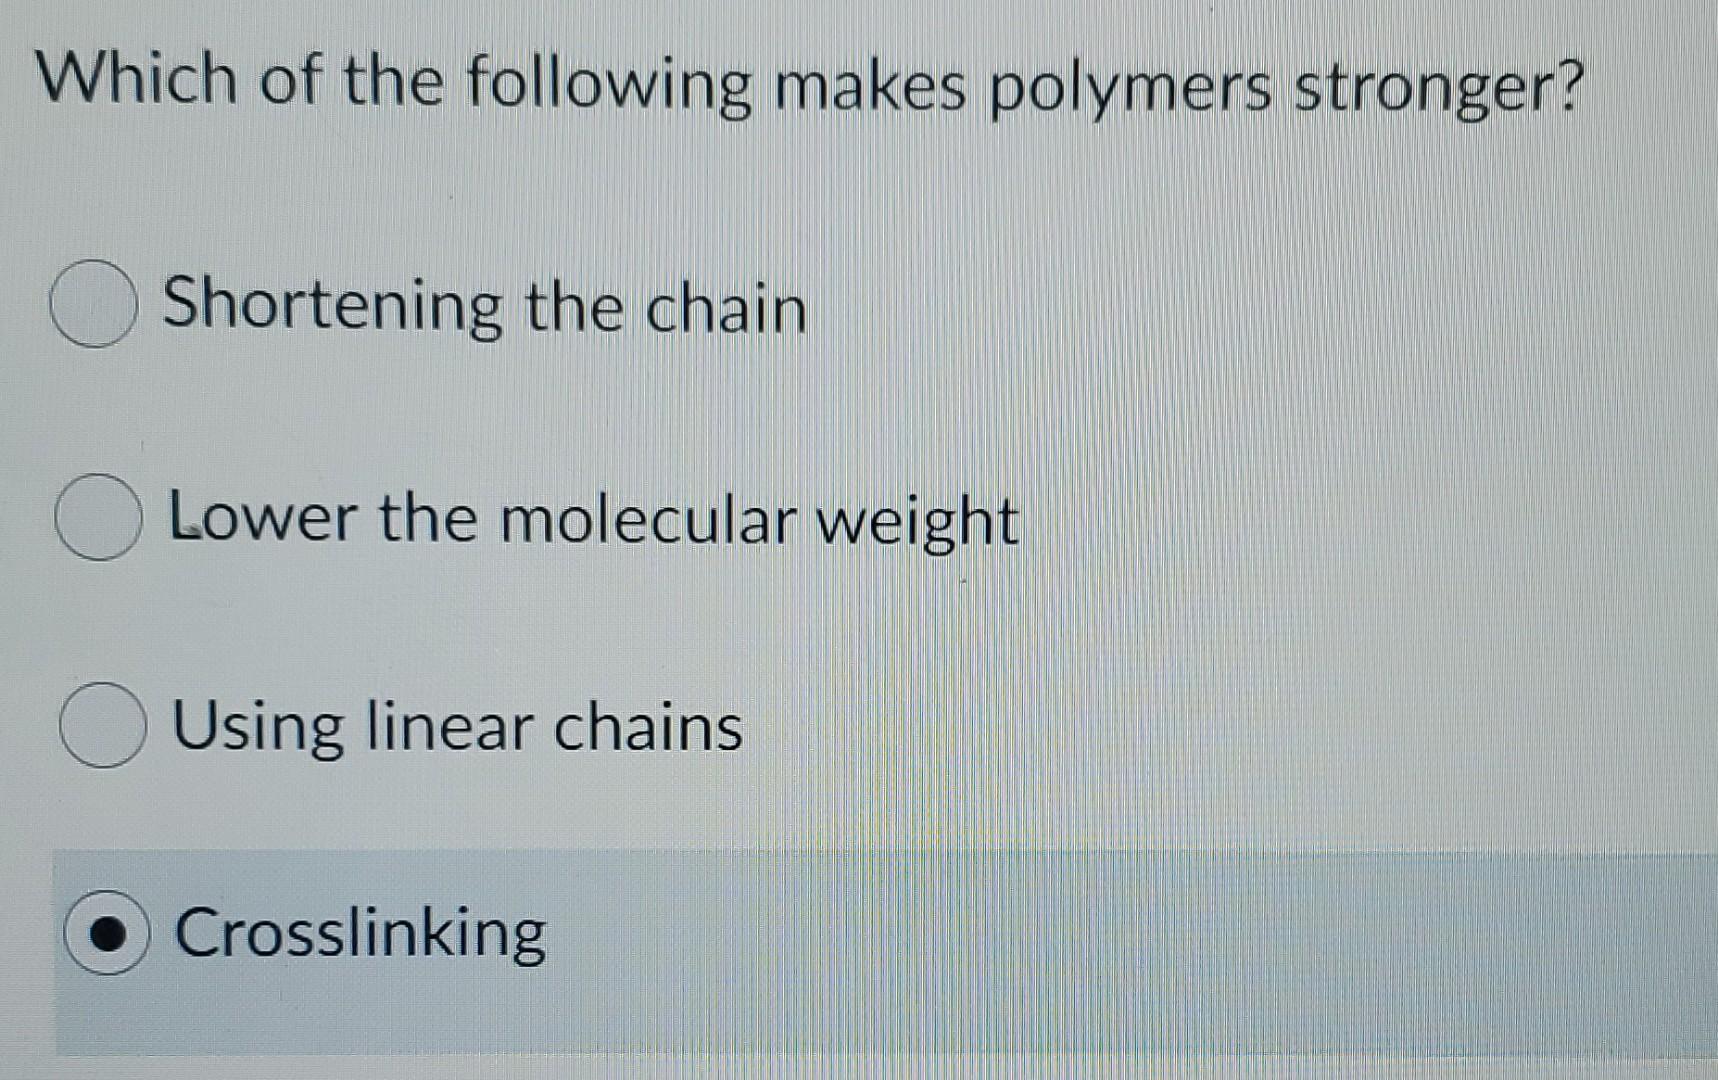 Products, LinearChains